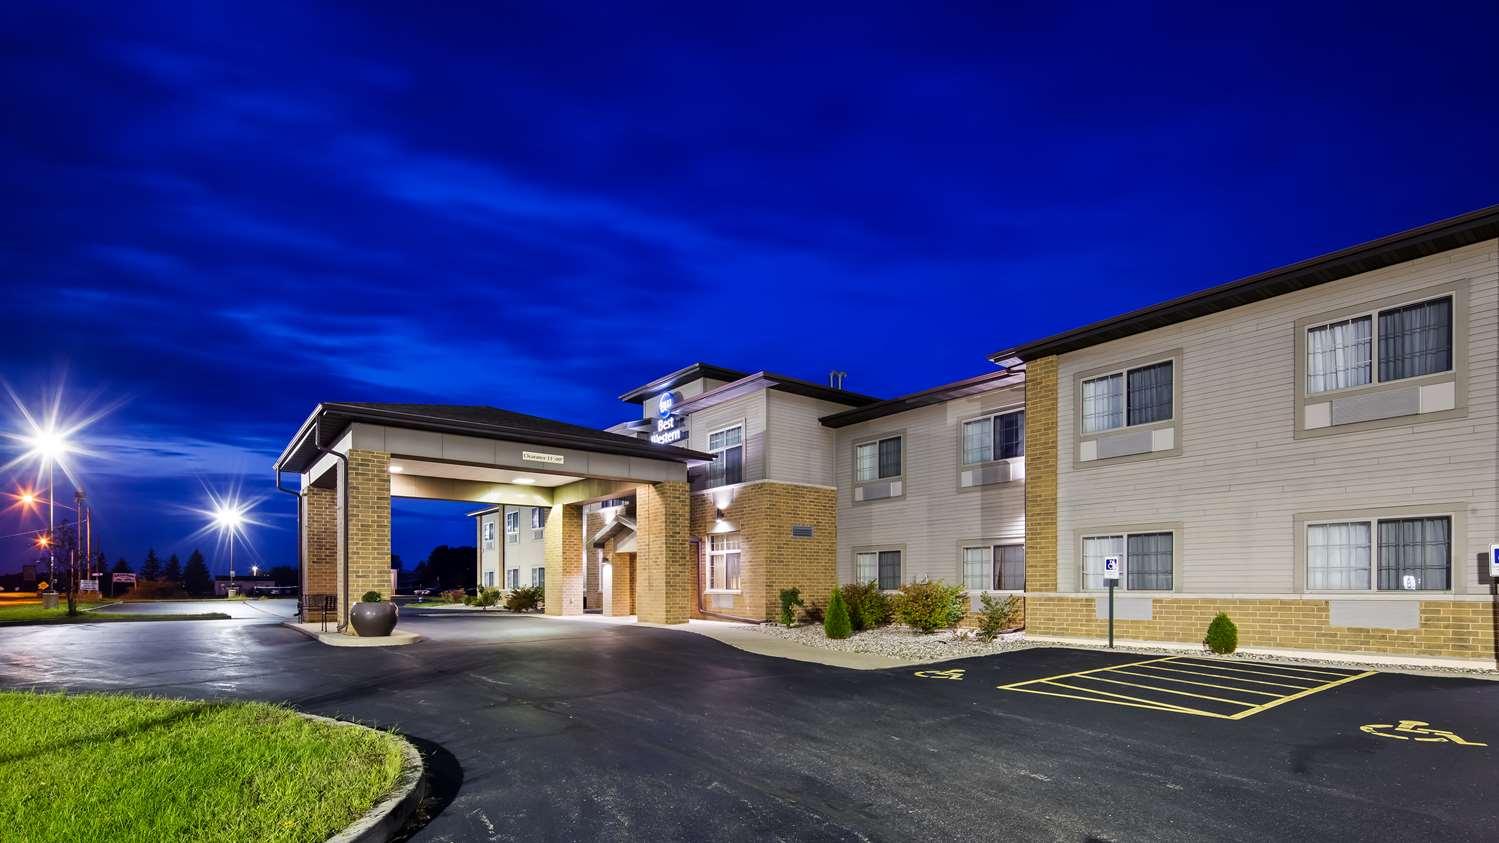 Best Western Plover Hotel & Conference Center in Plover, WI